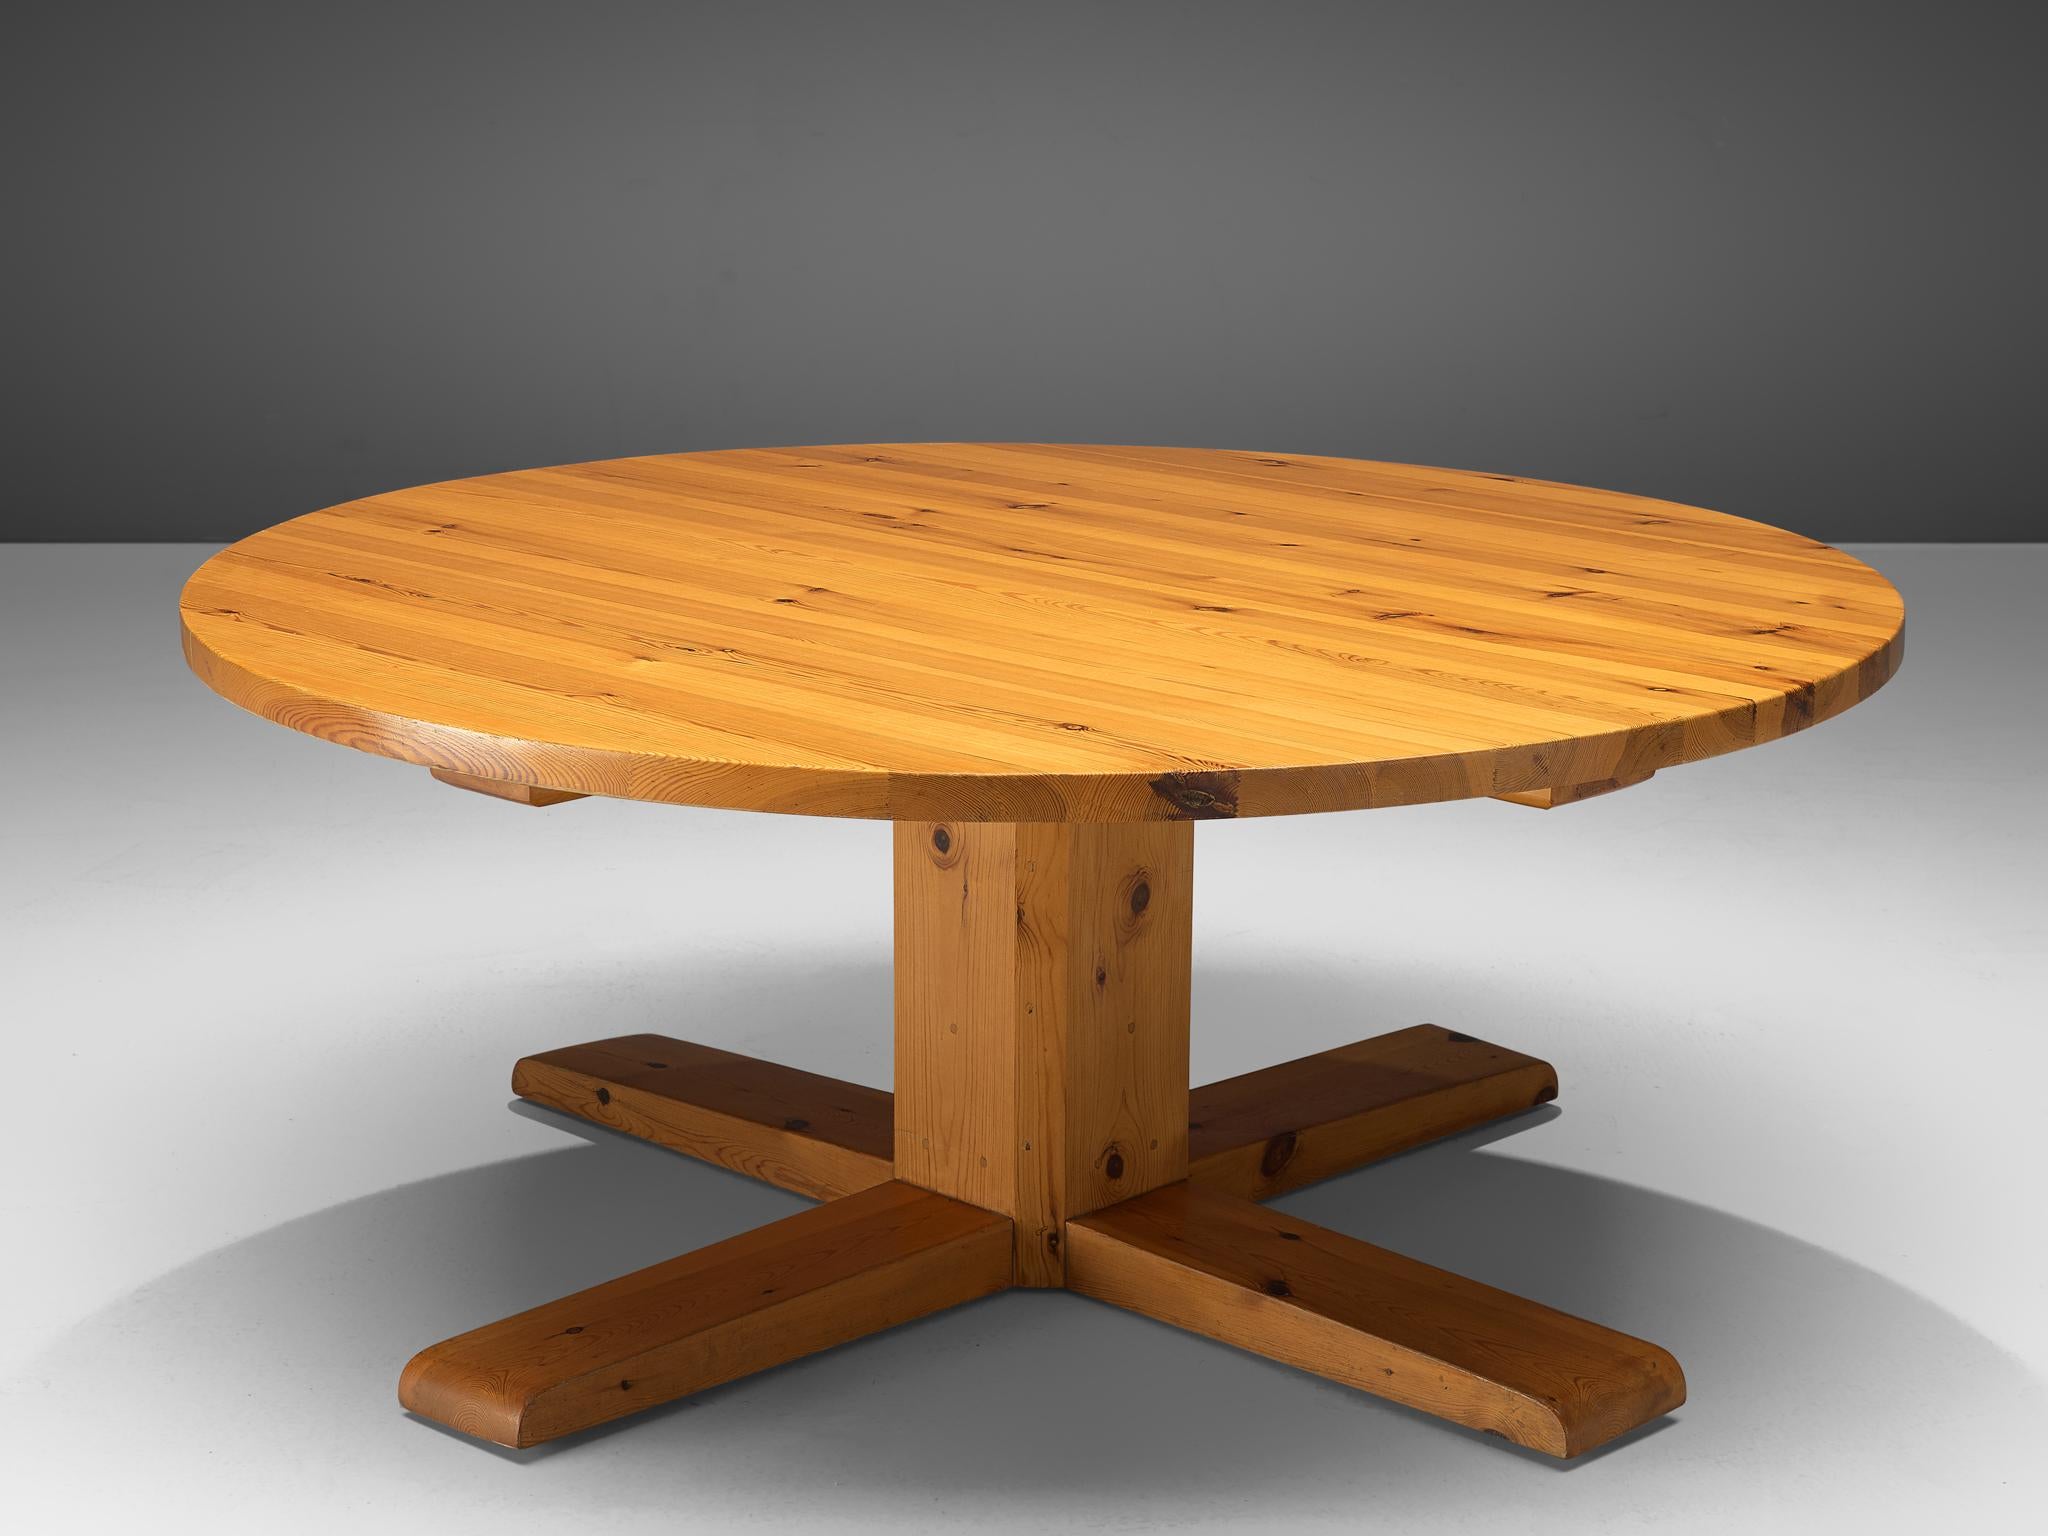 Large dining table, solid pine, Spain, 1950s

This remarkable table holds a strong expression due to several aspects that are all typical for Spanish Midcentury design. First the use of solid pine wood holds a rural and robust aesthetic. Secondly,